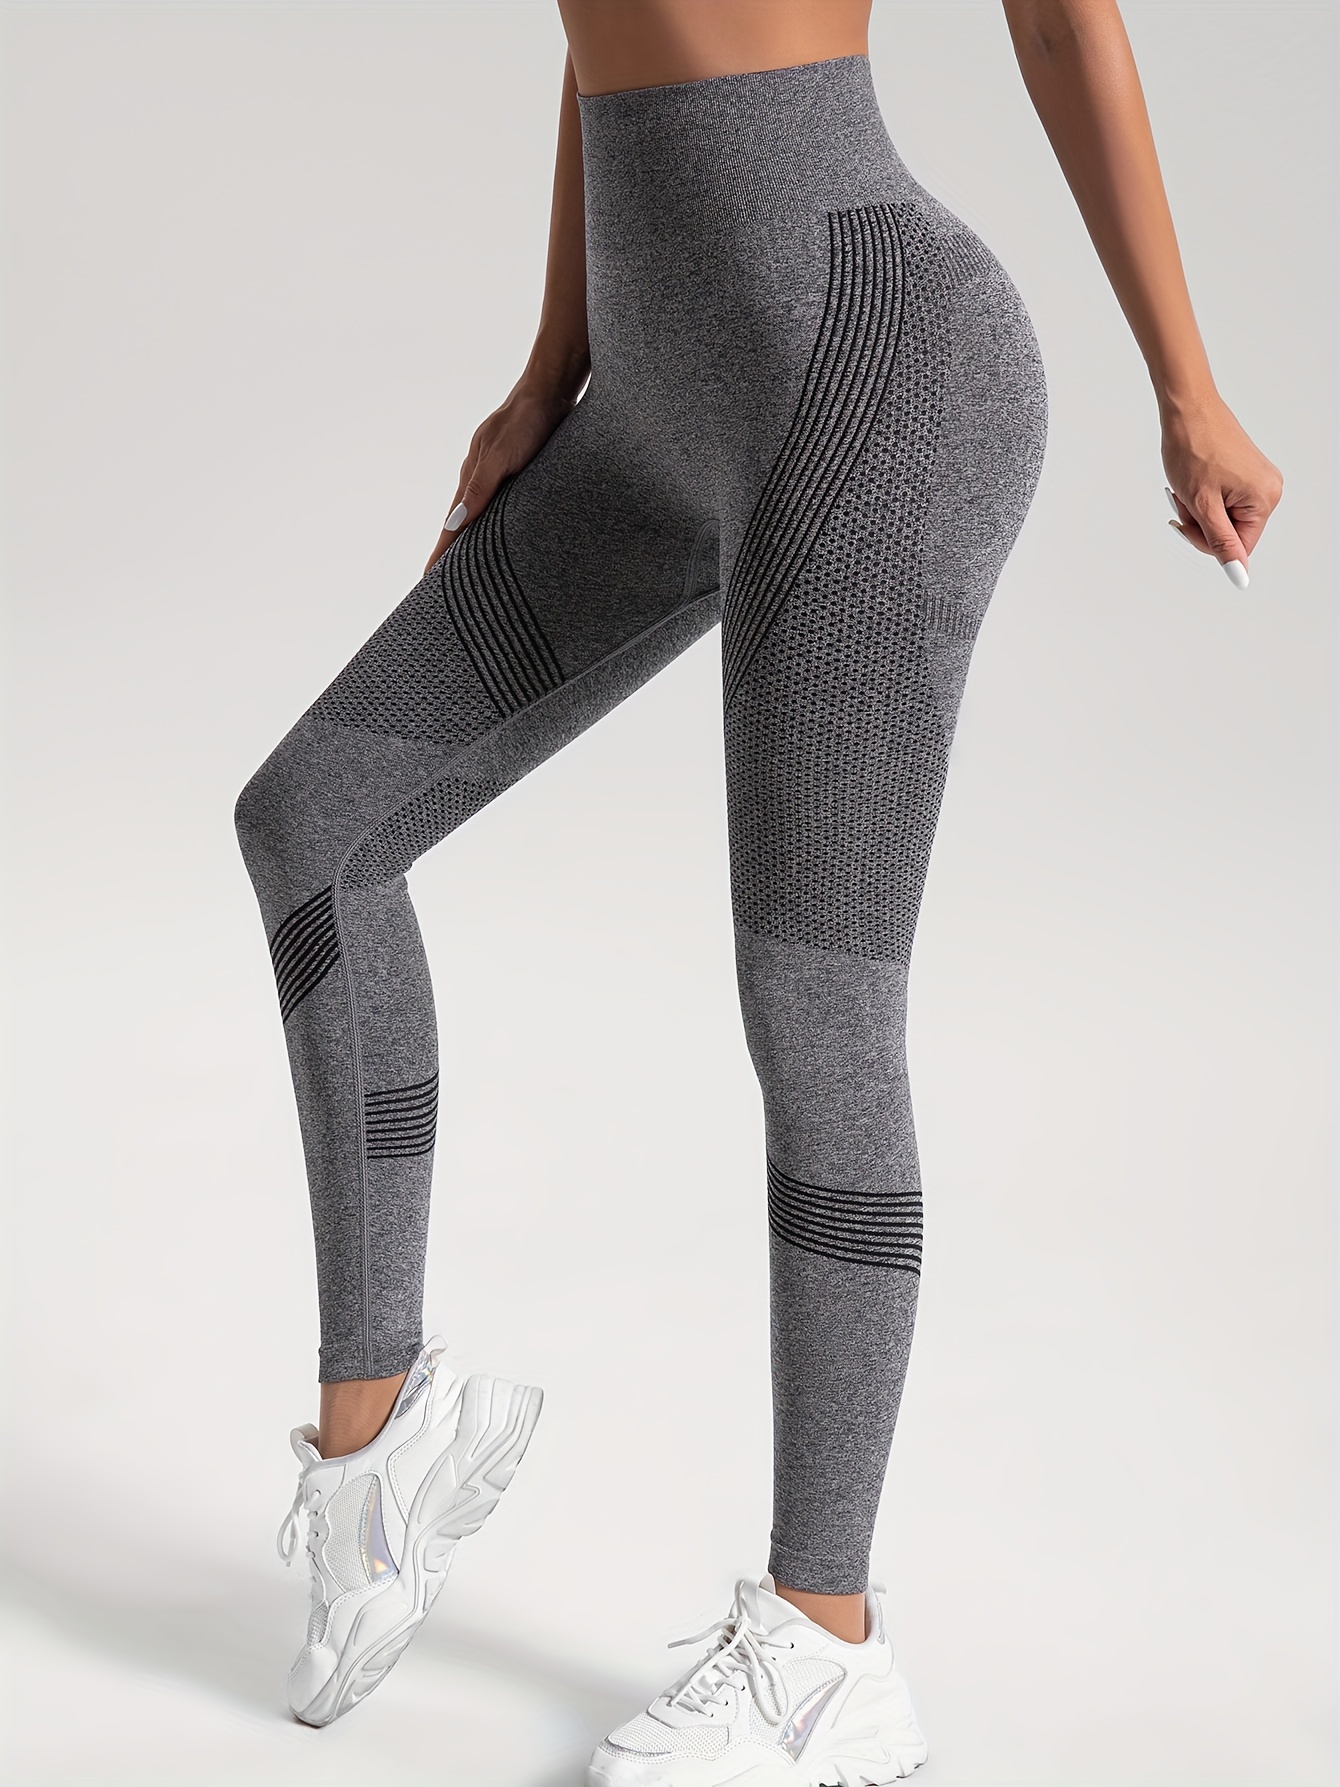 High Waist, Stretchy and Recovery Sports Leggings Grey Shop Now